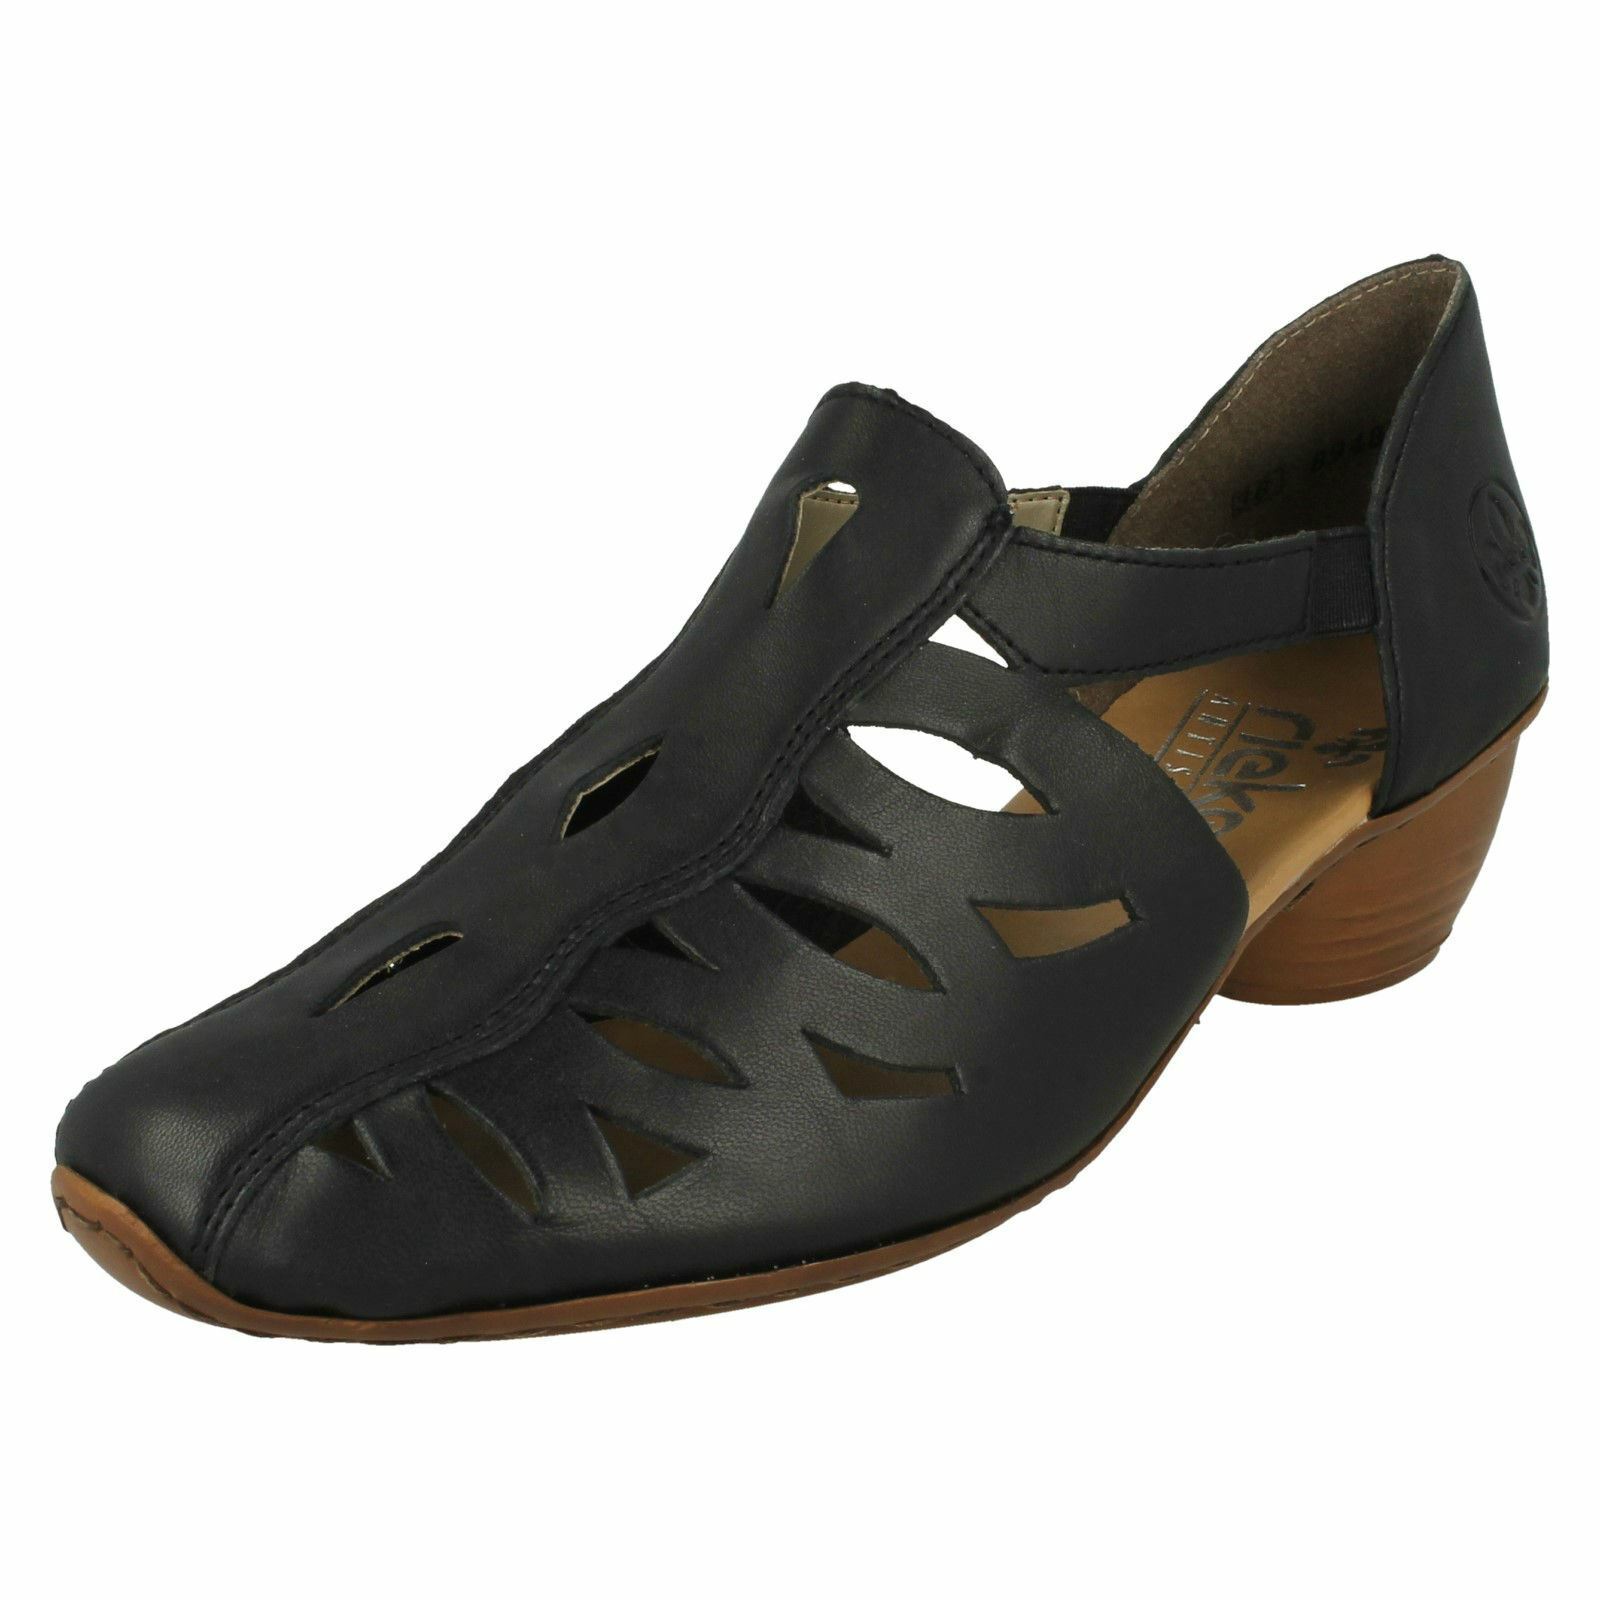 Ladies Rieker Smart Cut Shoes Out Dealing full Ranking TOP15 price reduction 43776 Detailed